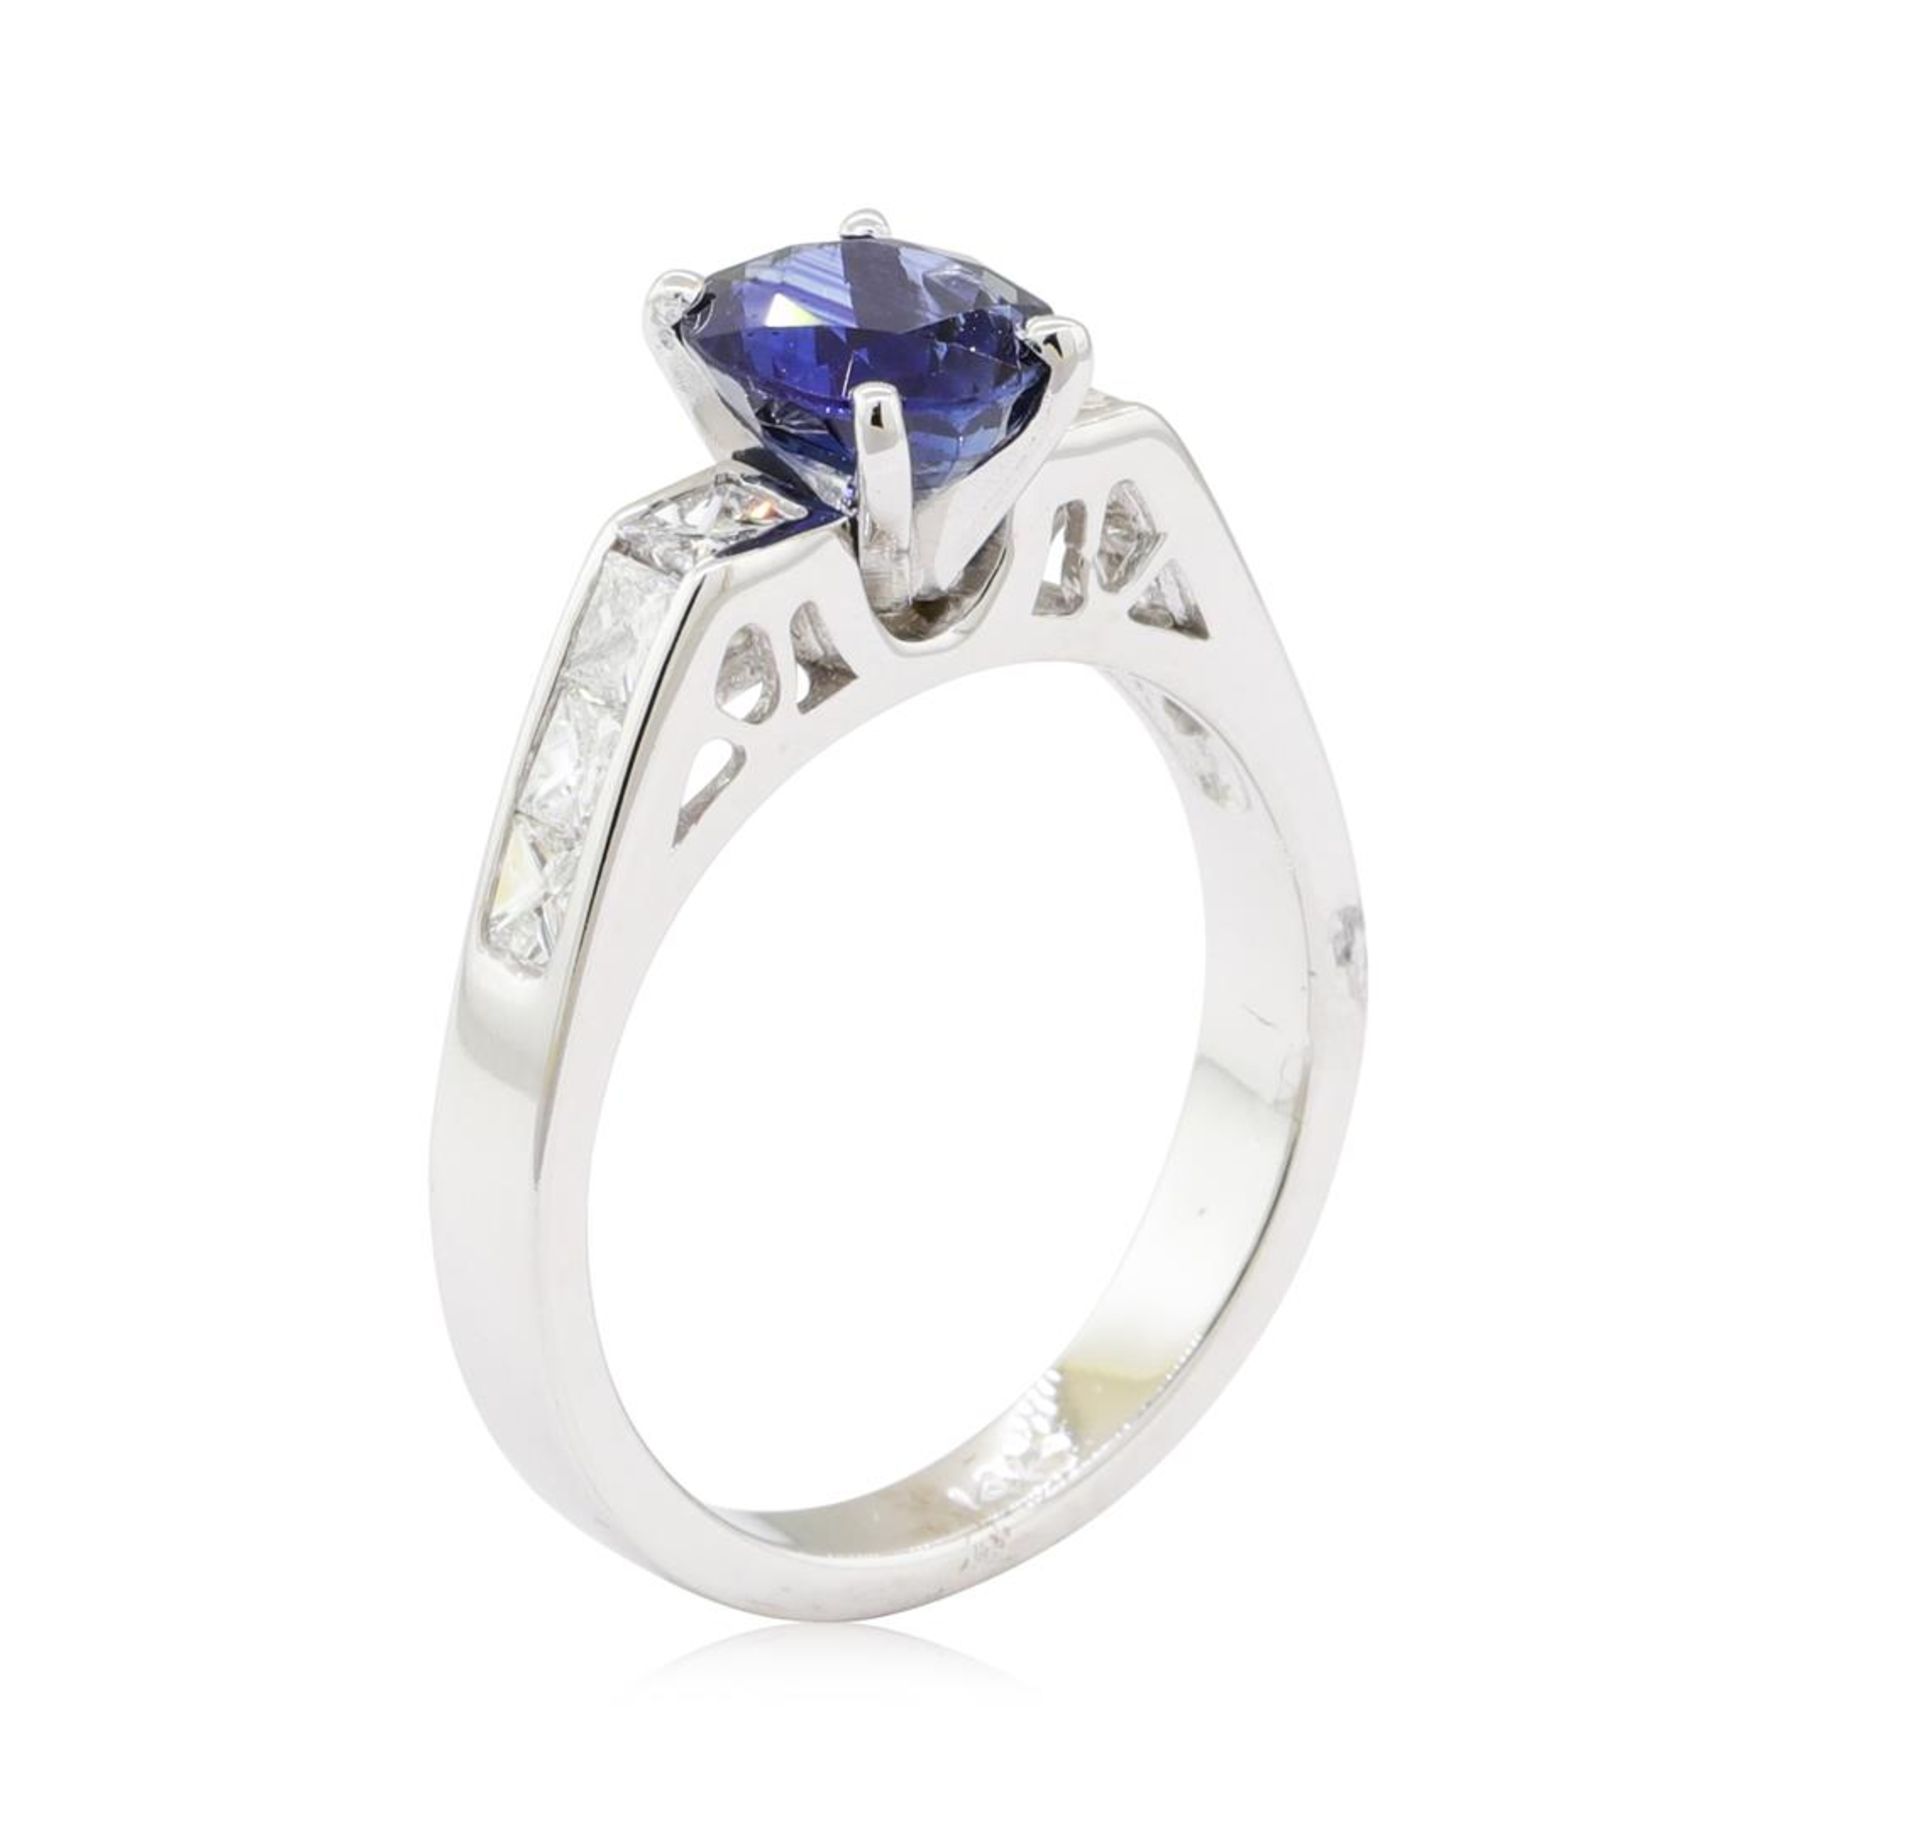 2.42 ctw Sapphire and Diamond Ring - 14KT White Gold - Image 4 of 5